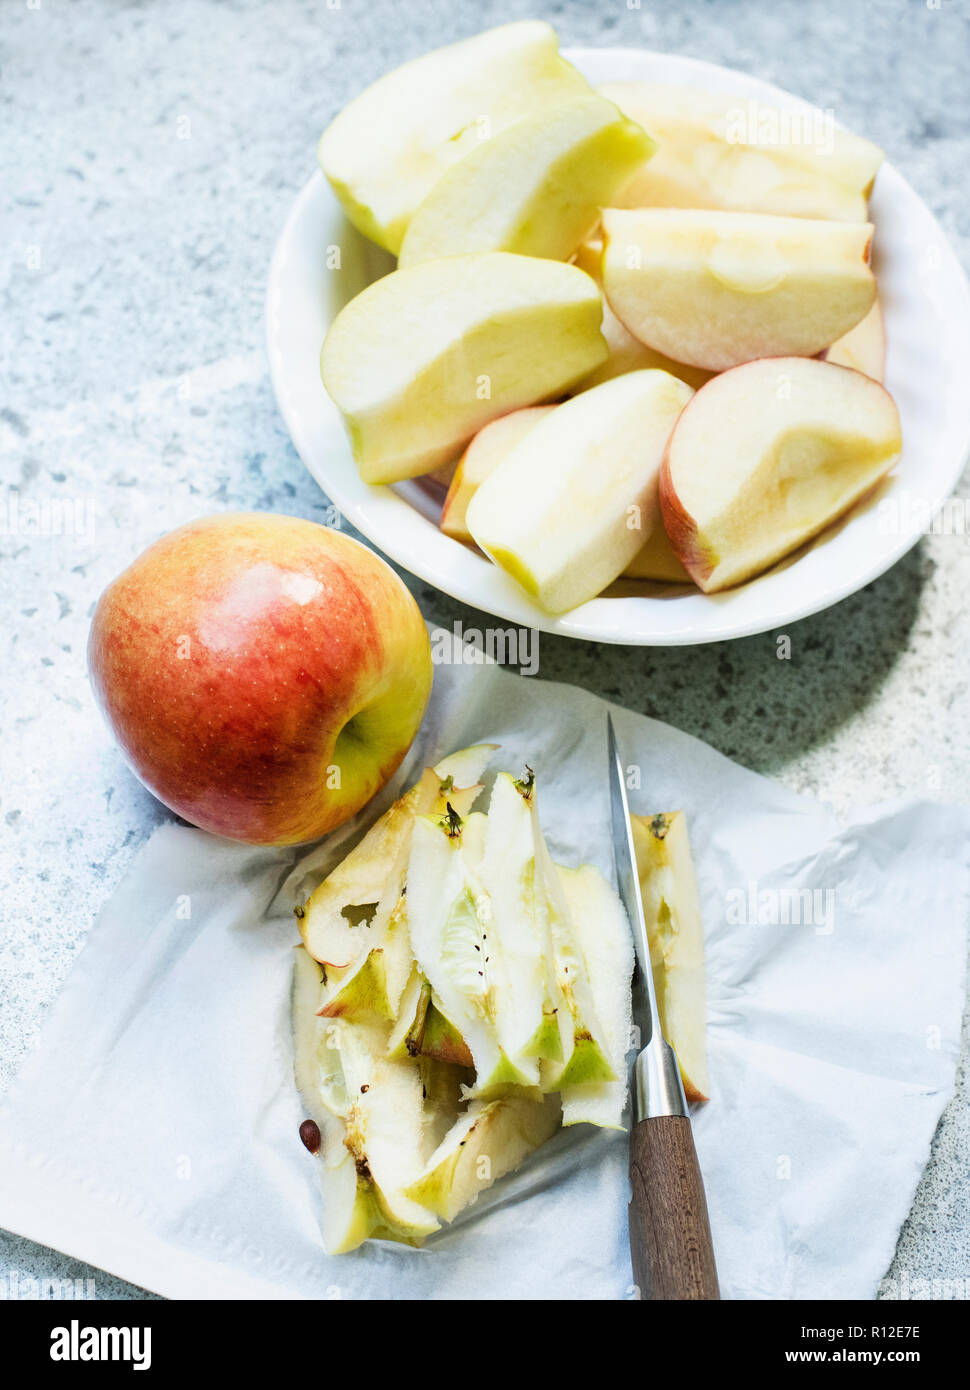 Sliced apples with core removed Stock Photo